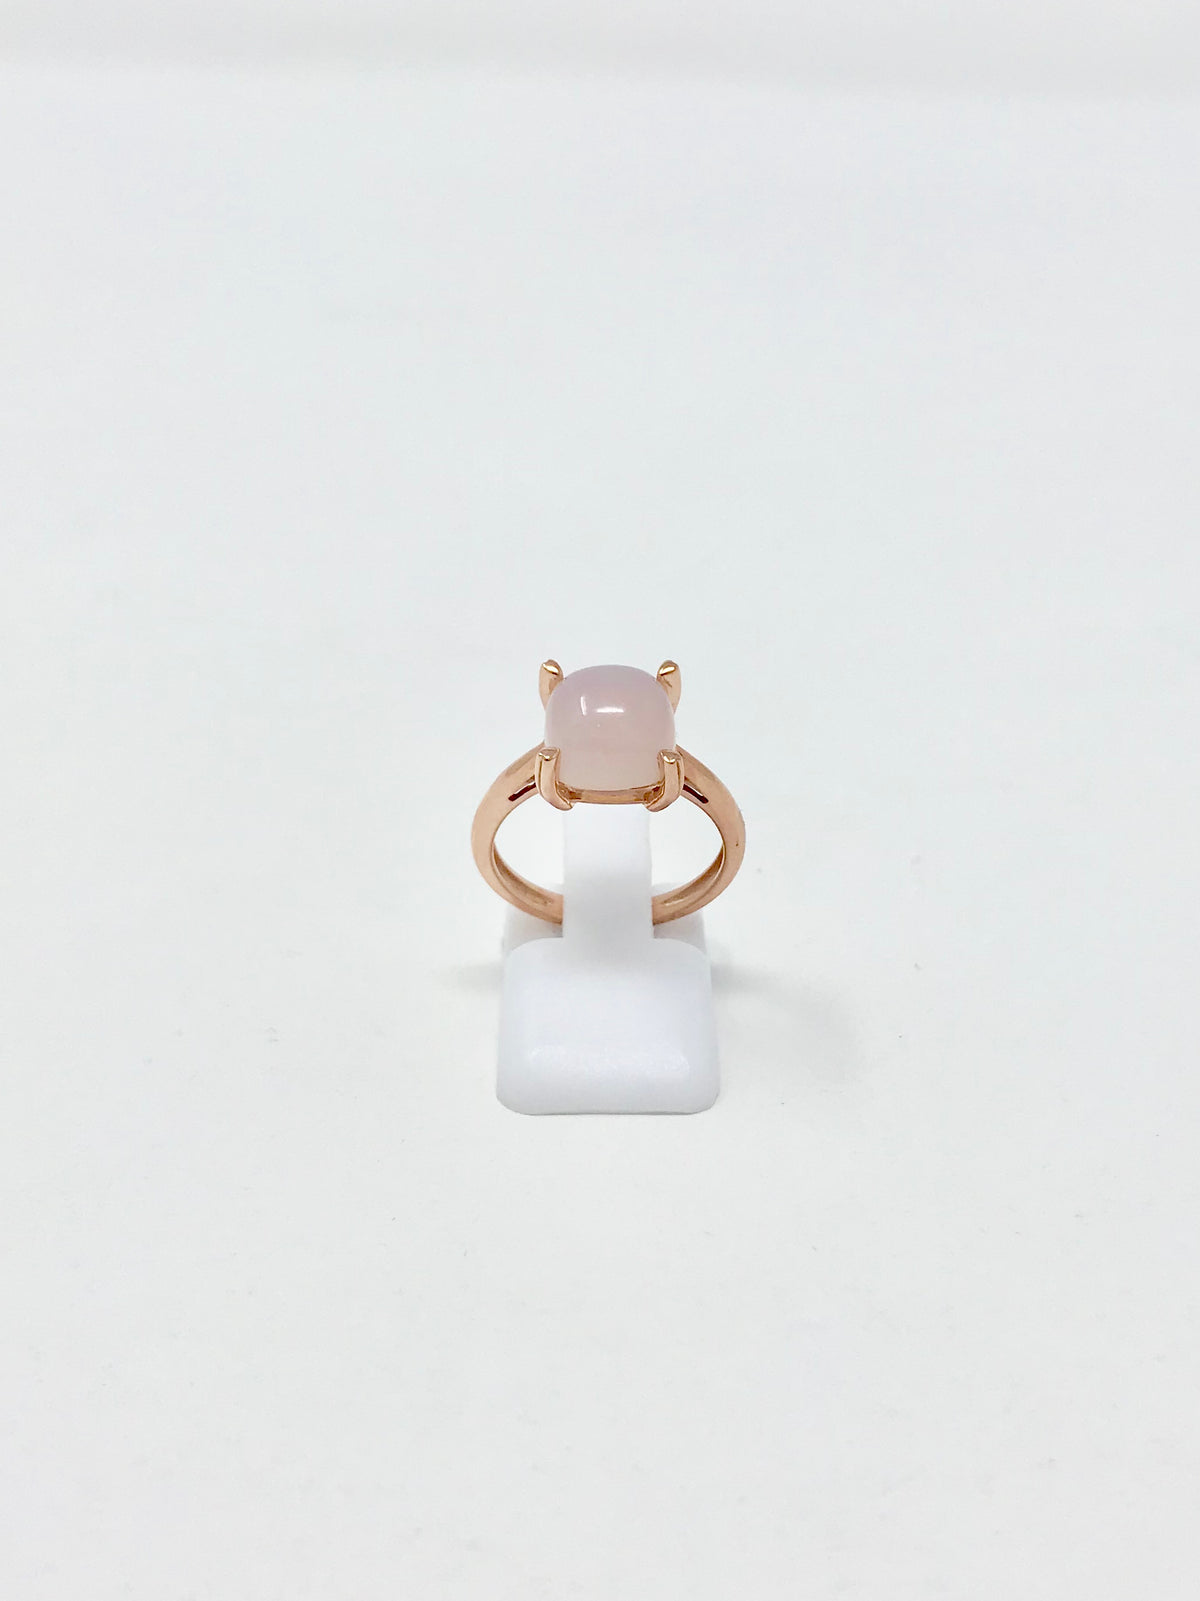 Pink Agate Ring